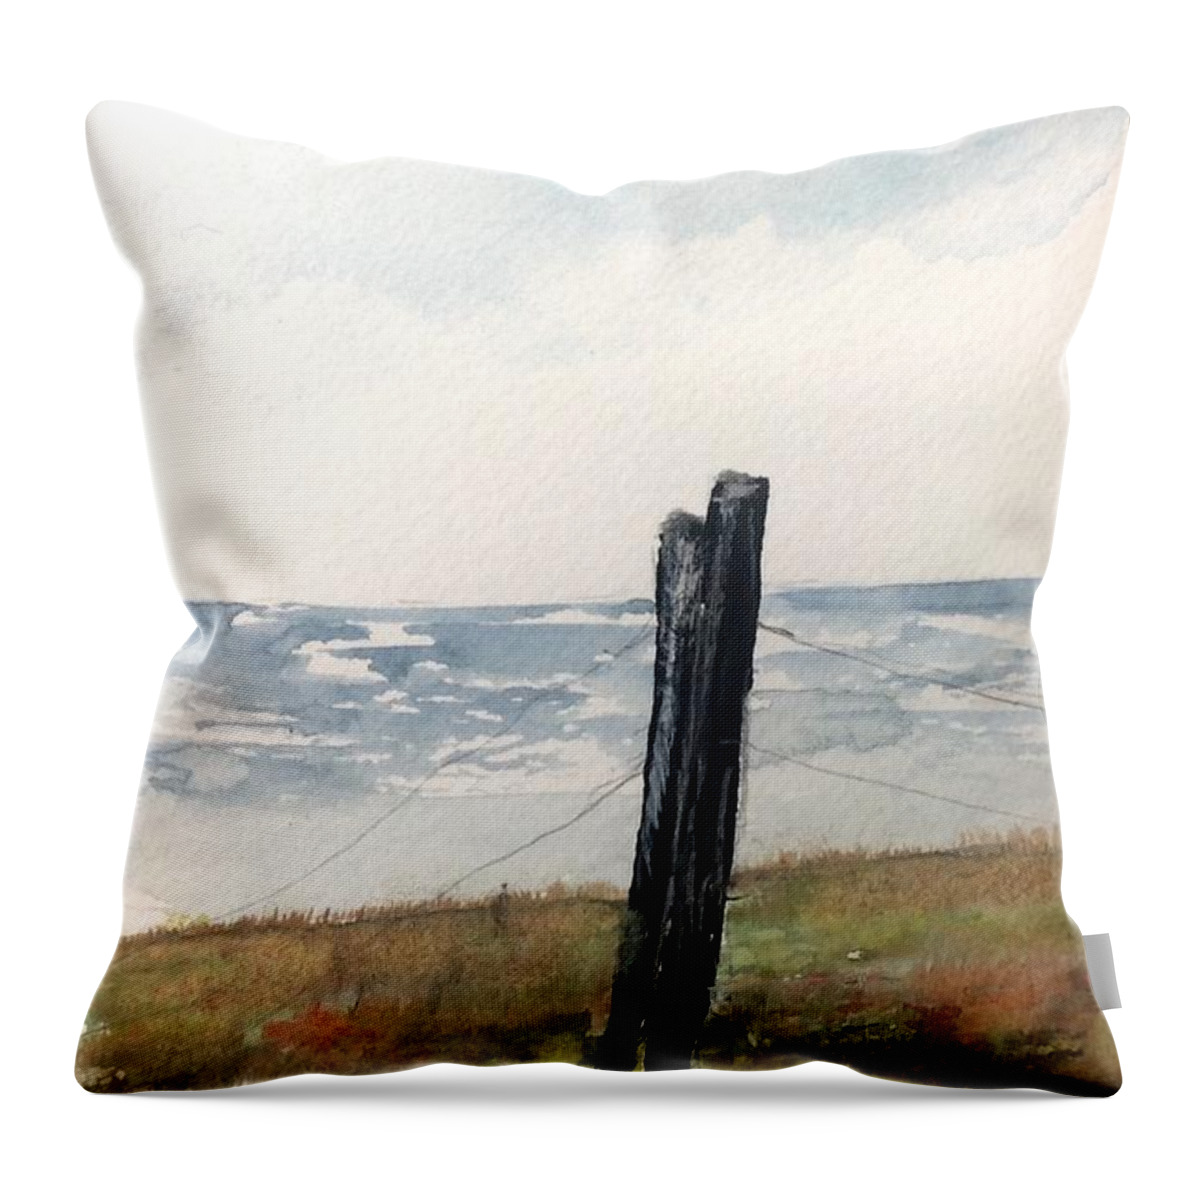 Watercolour Landscape Painting Throw Pillow featuring the painting The Post by Desmond Raymond